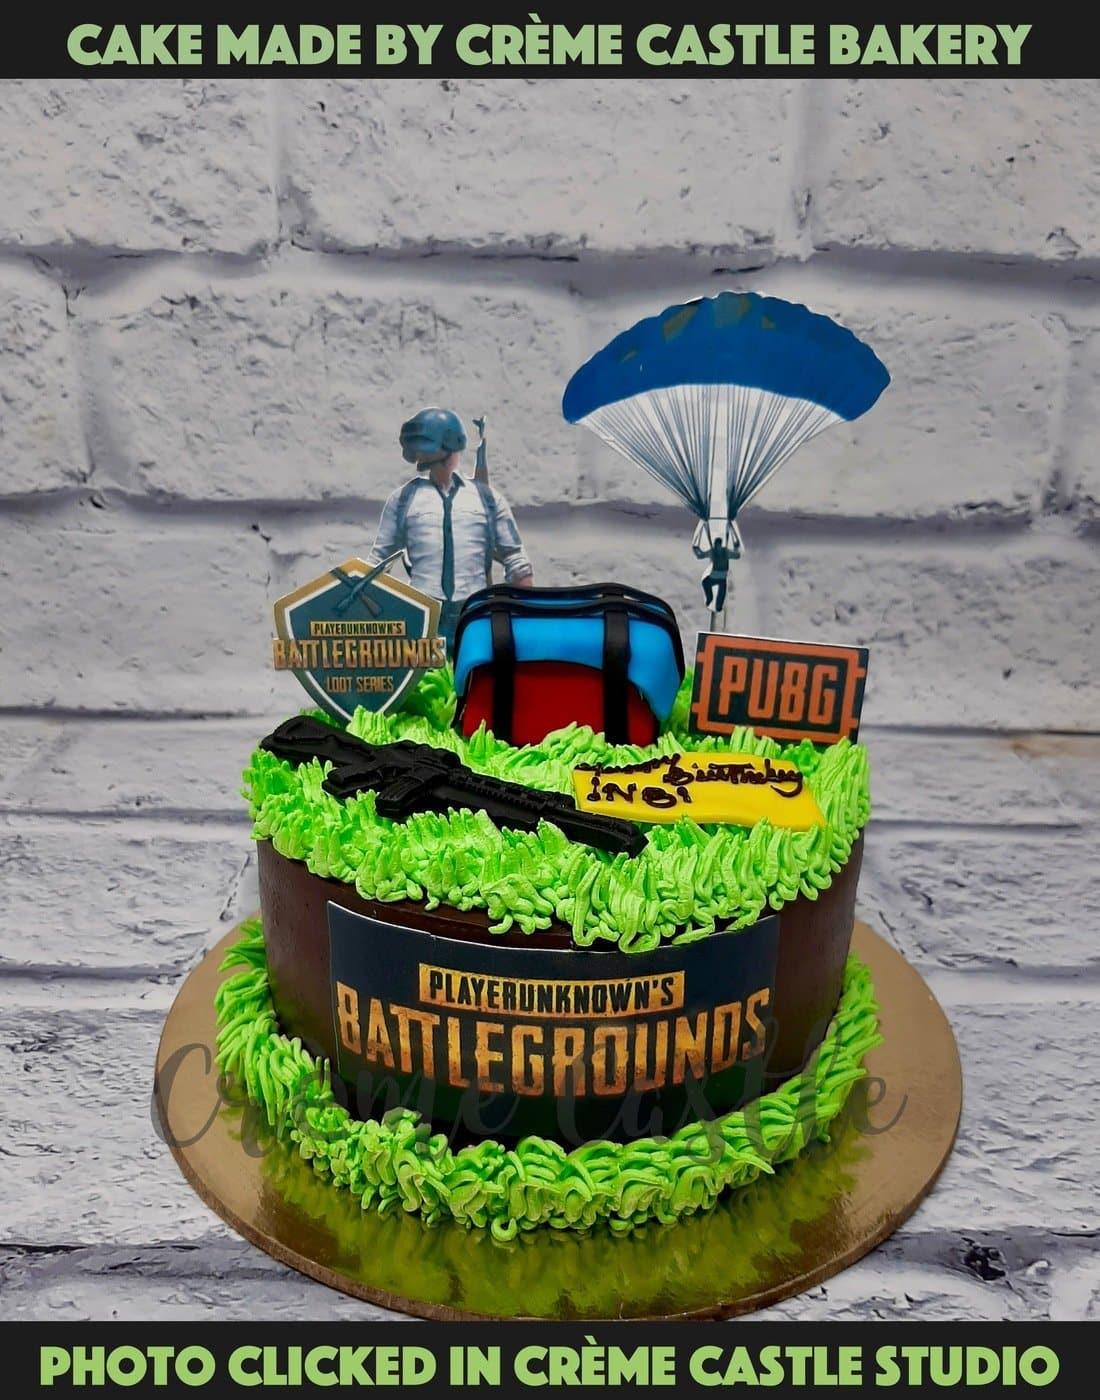 Order Pubg Cake online online | free delivery in 3 hours - Flowera